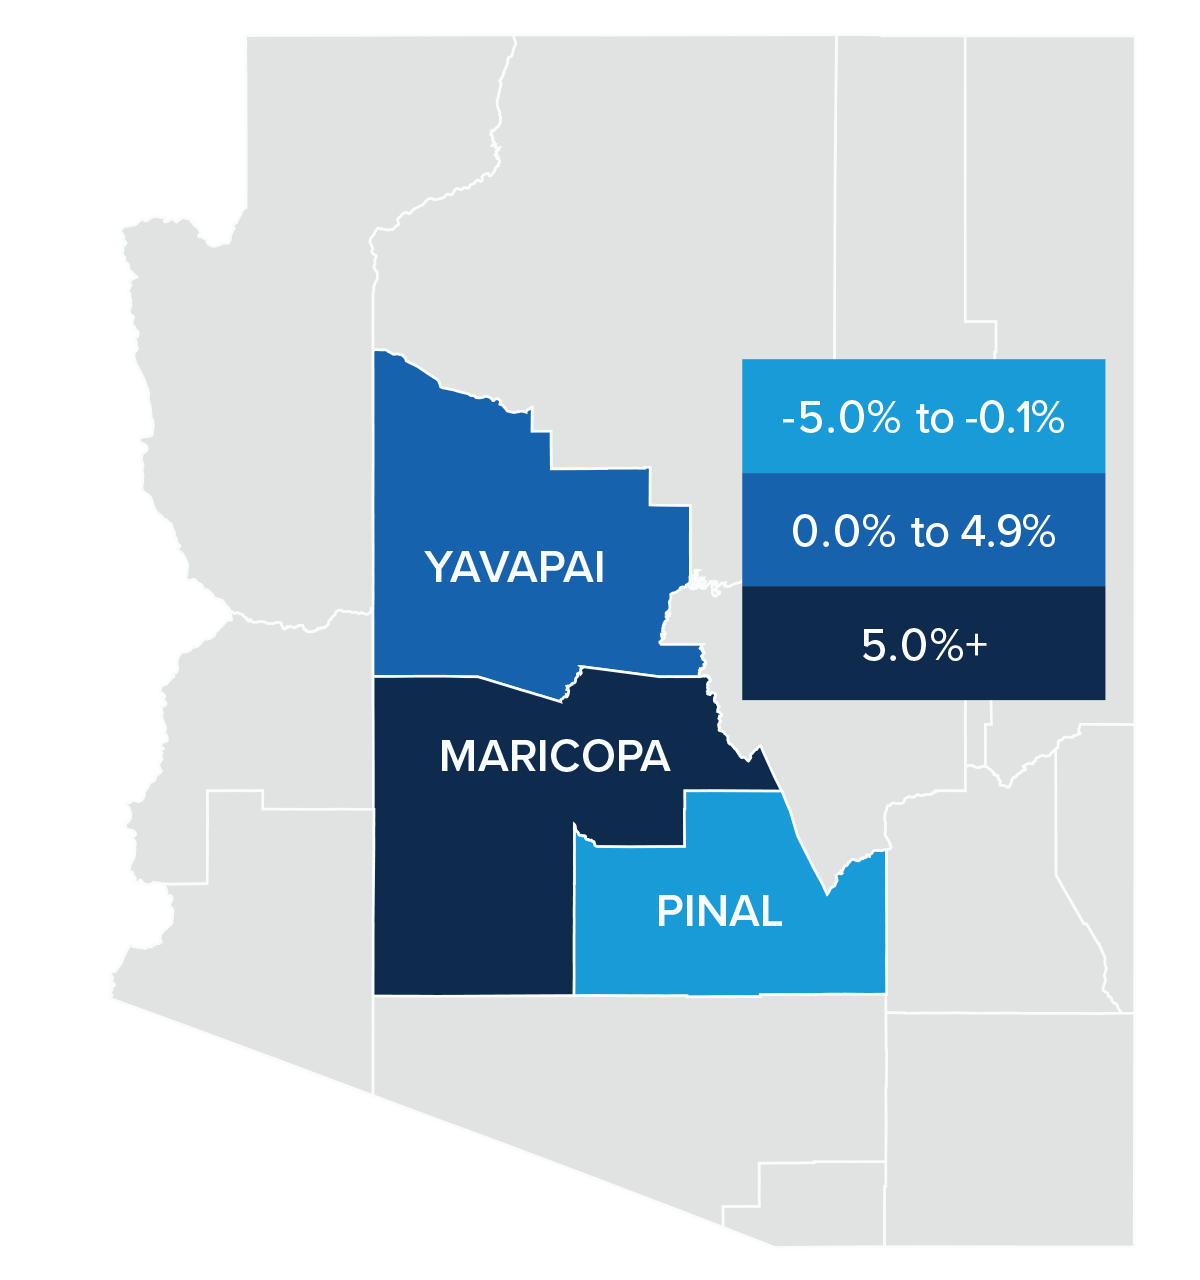 A map showing the real estate home prices percentage changes for various counties in Arizona. Different colors correspond to different tiers of percentage change. Maricopa came in above 5% and represented in the corresponding navy color. Yavapai was in the 0-4.9% range and is represented by a light blue color. Pinal was in the -5 to -1% range and is in the lightest blue color.